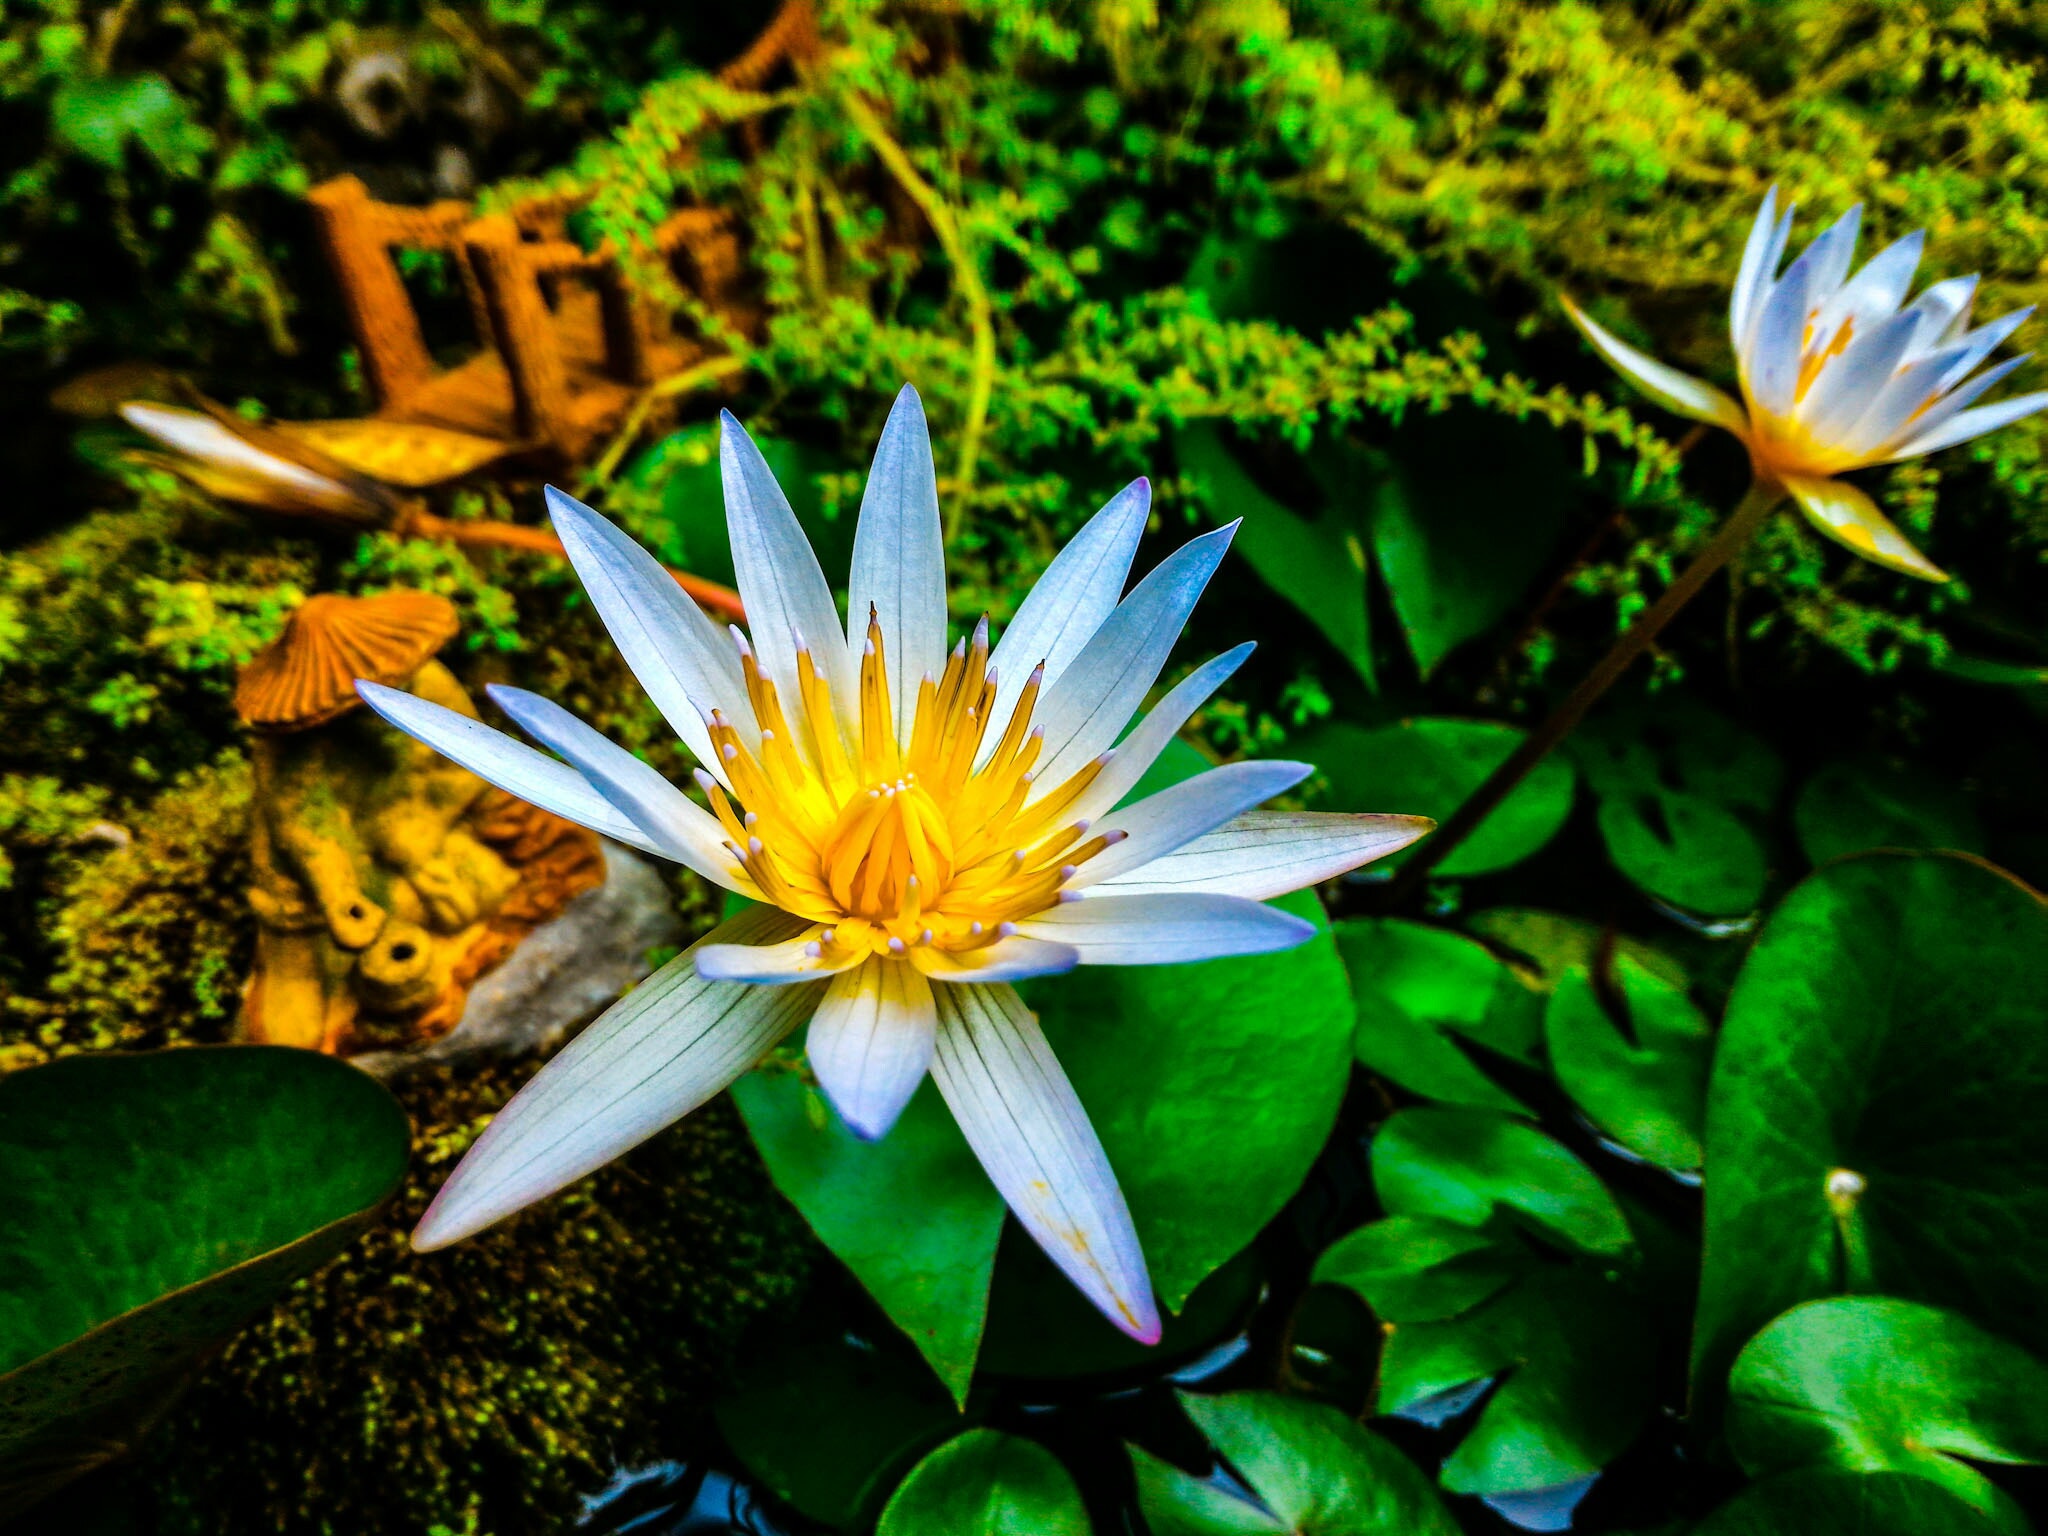 White and Yellow Flowers, Aquatic plant, Waterlily, Water, Summer, HQ Photo